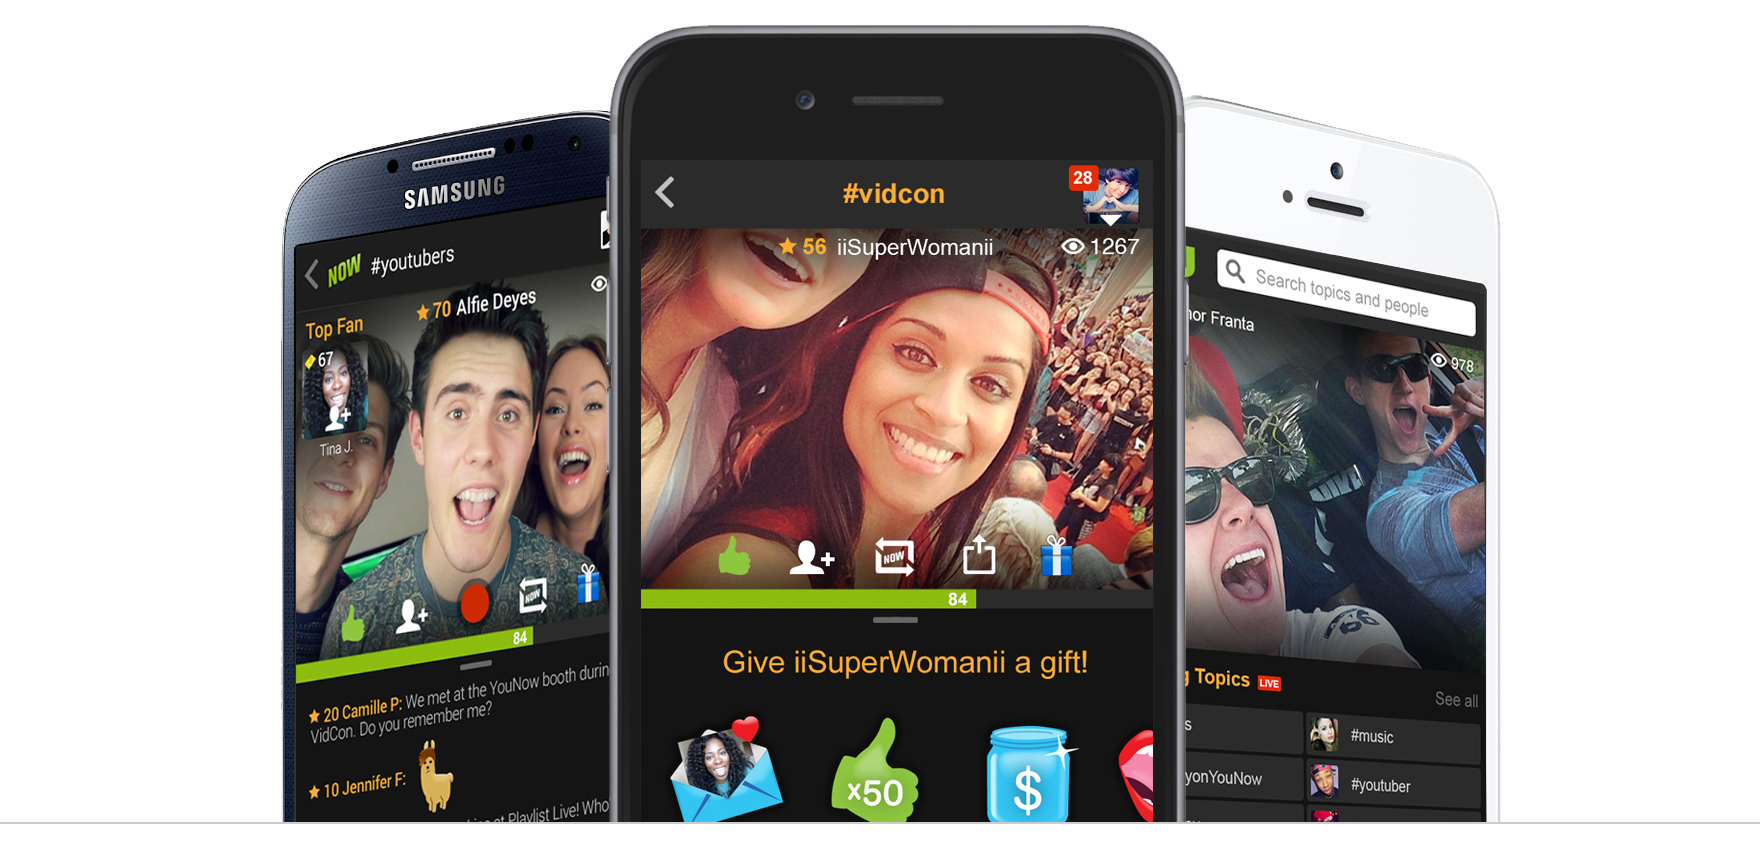 Younow - Broadcast Live, Video Chat And Meet New Friends!